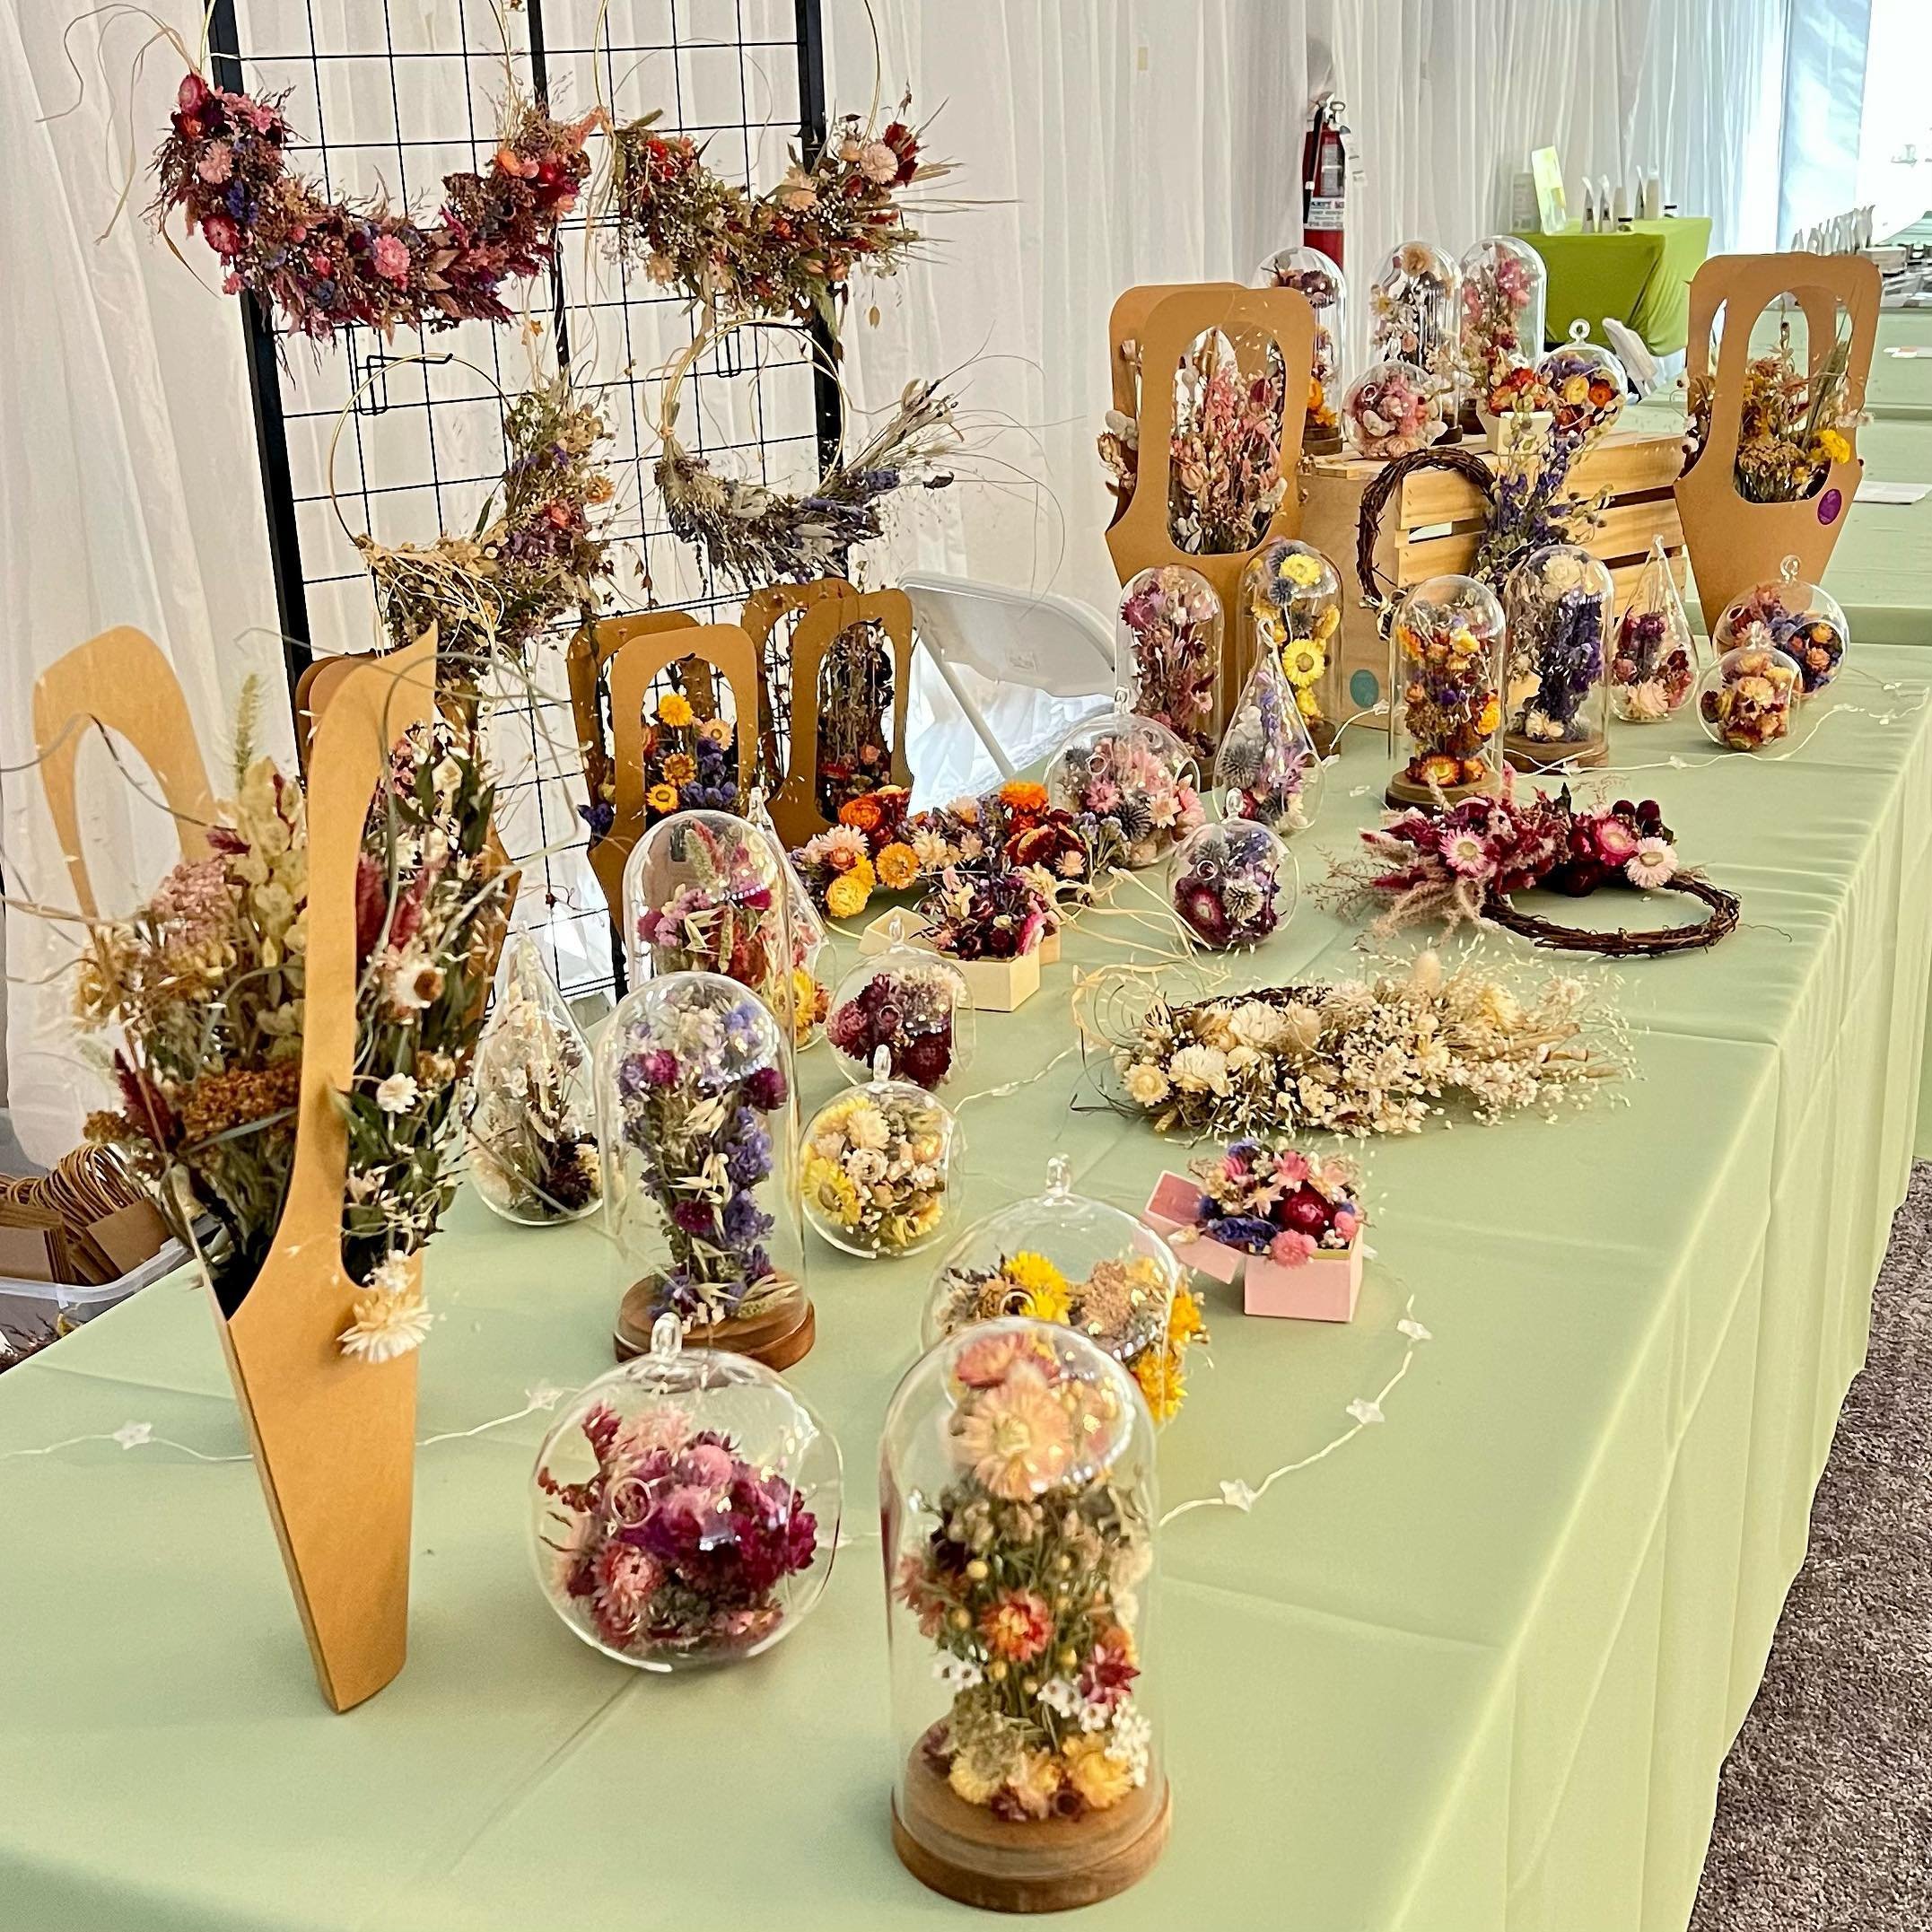 Come to the @lyndhurst_mansion bloom festival this weekend and stop by the vendor&rsquo;s market. @muriel.fleurs has prepared delicate and elegant dried flowers cuties 🌸. I am very fond of dried flowers, there is something special to them. They brin